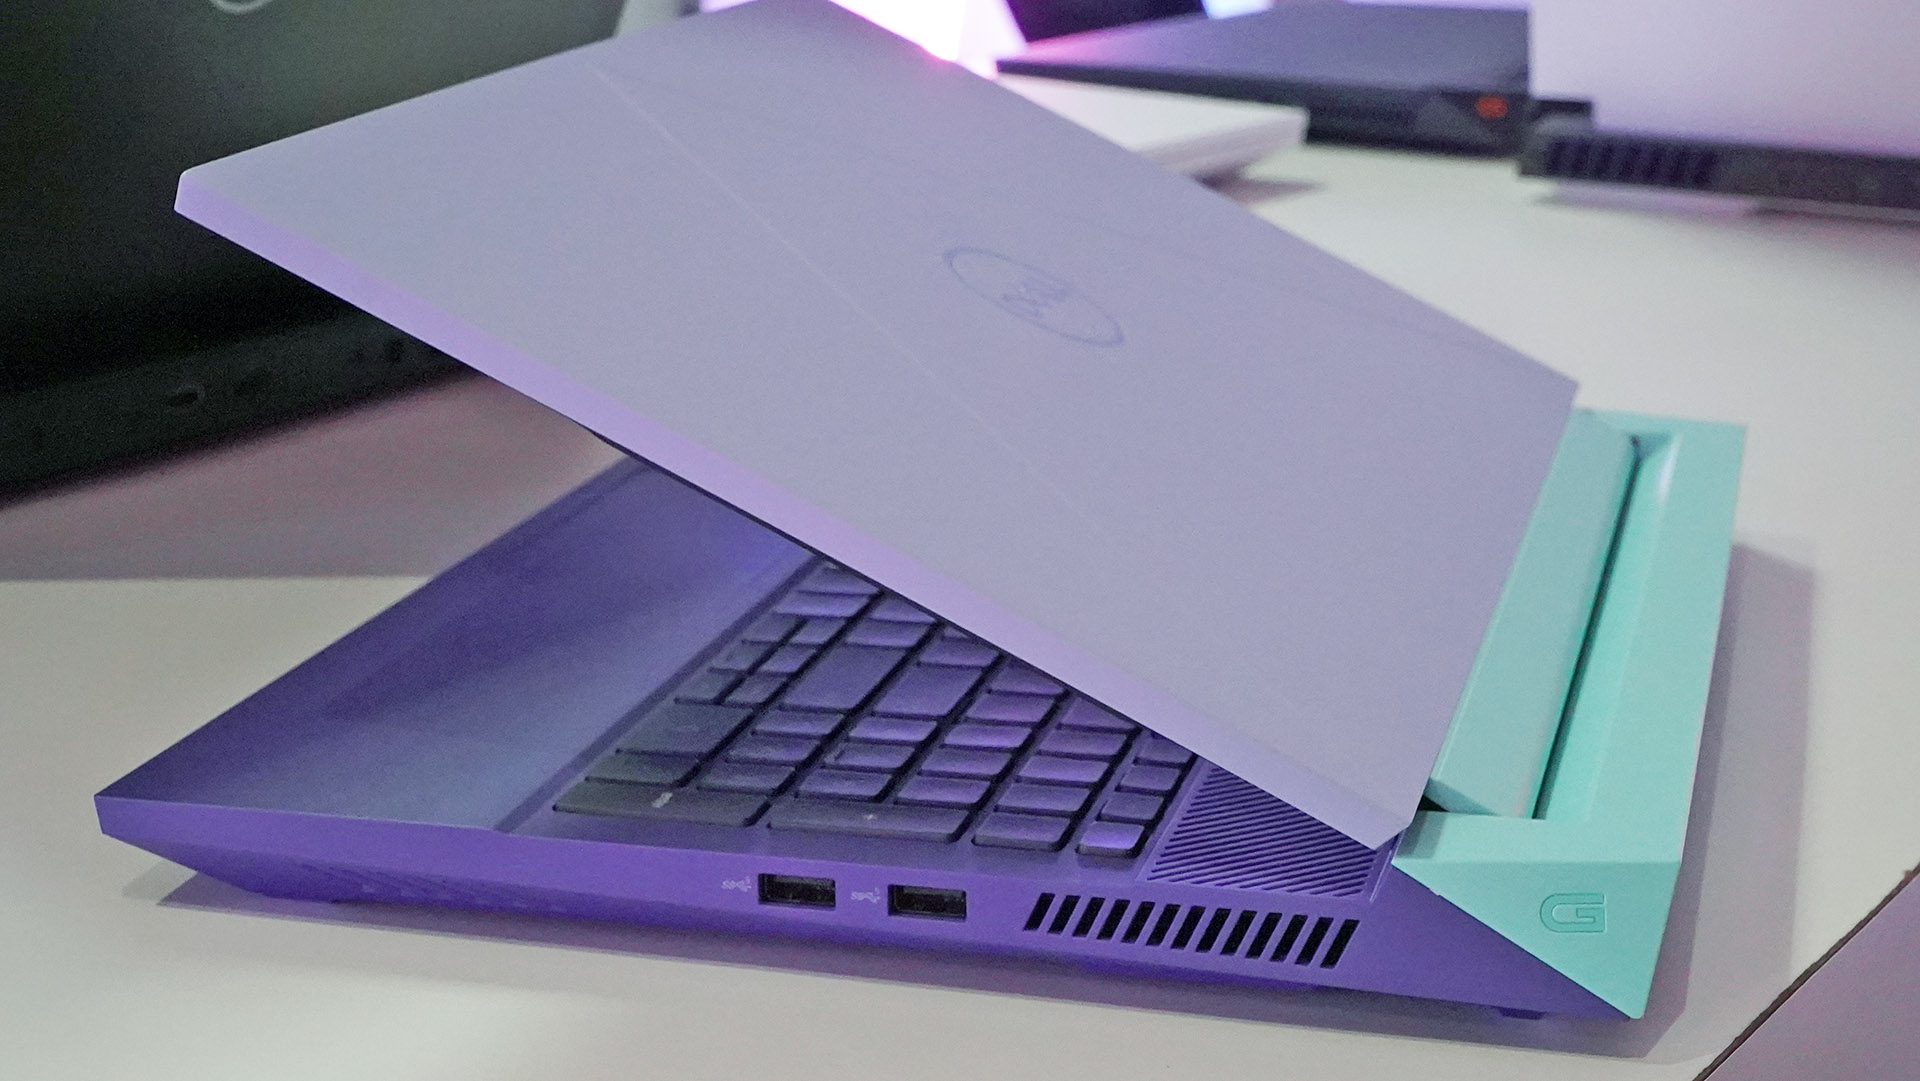 Dell G15 gaming laptop, purple and teal